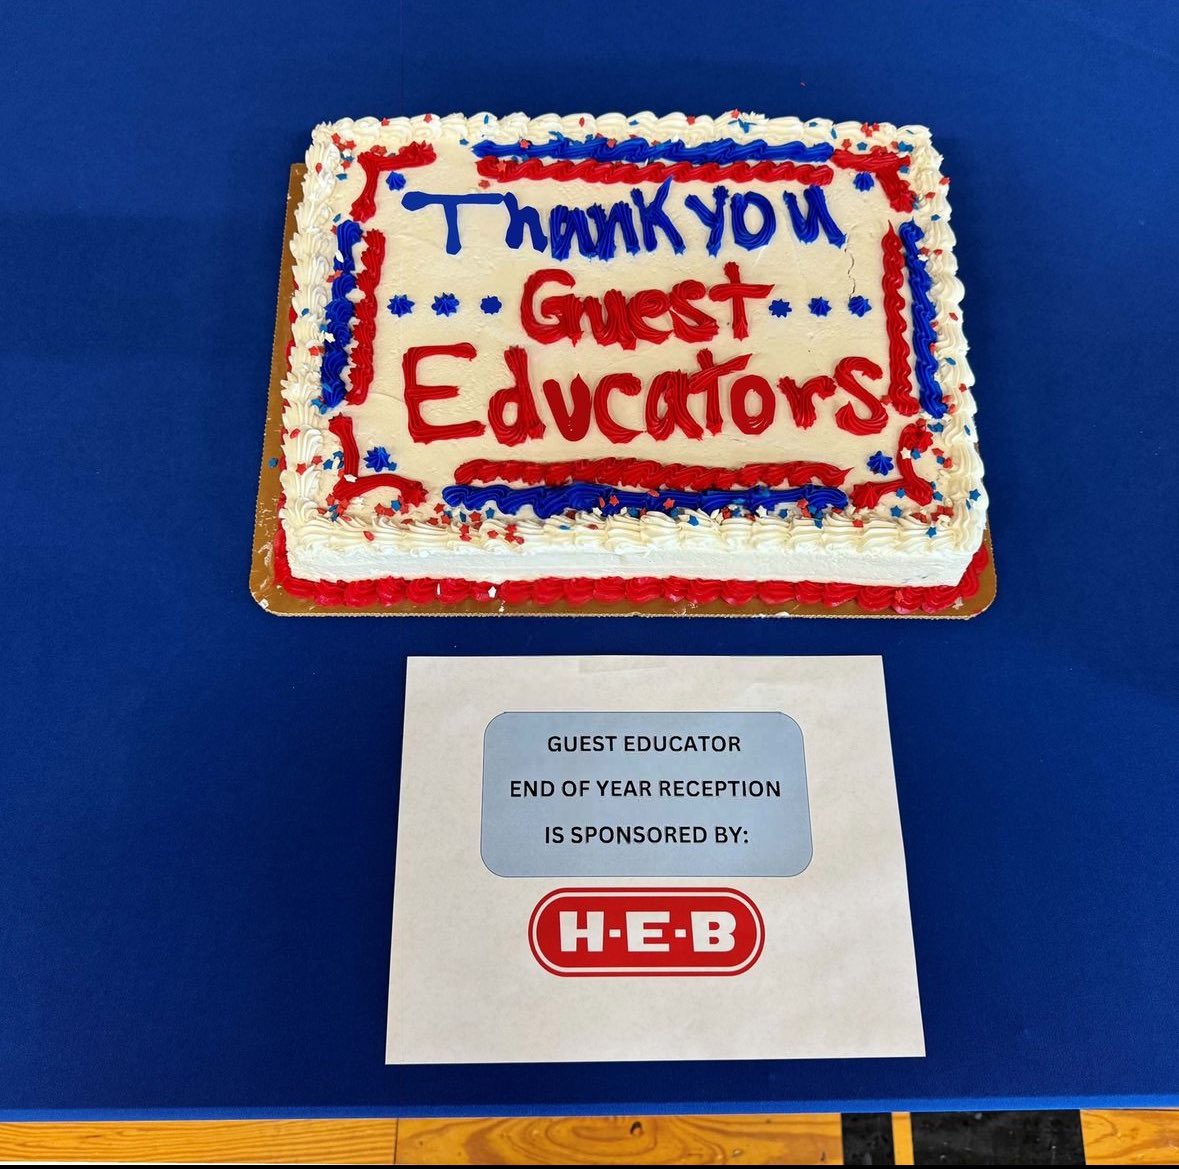 Thank you to all of our Guest Educators for all you do and to everyone who attended our End of Year Reception yesterday. Thank you to @HEB and @aplusfcu for sponsoring this event! Congrats to our 4 raffle winners! We hope you all have a great summer! @pfisd #pfamily